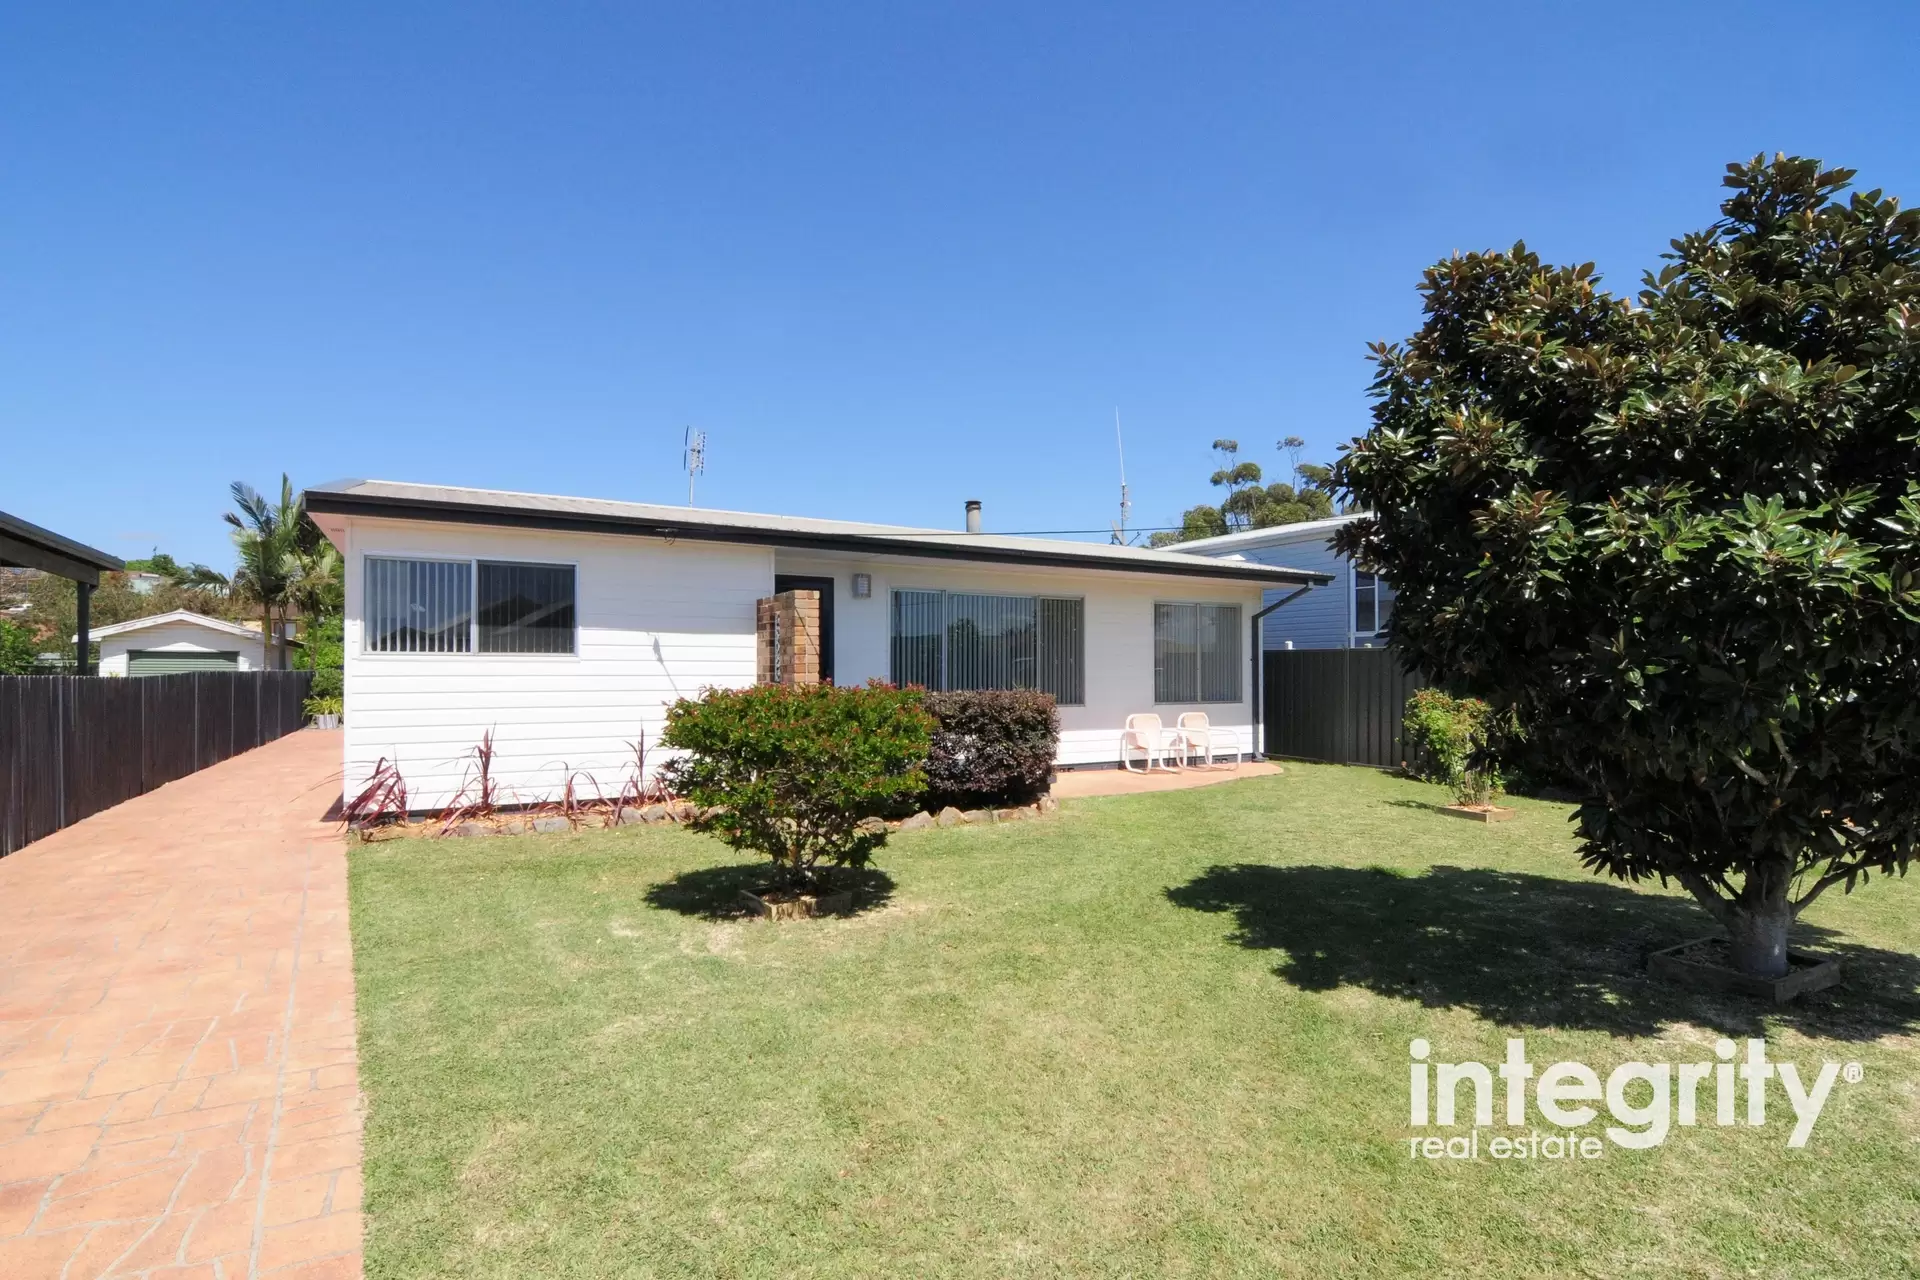 42 Adelaide Street, Greenwell Point Leased by Integrity Real Estate